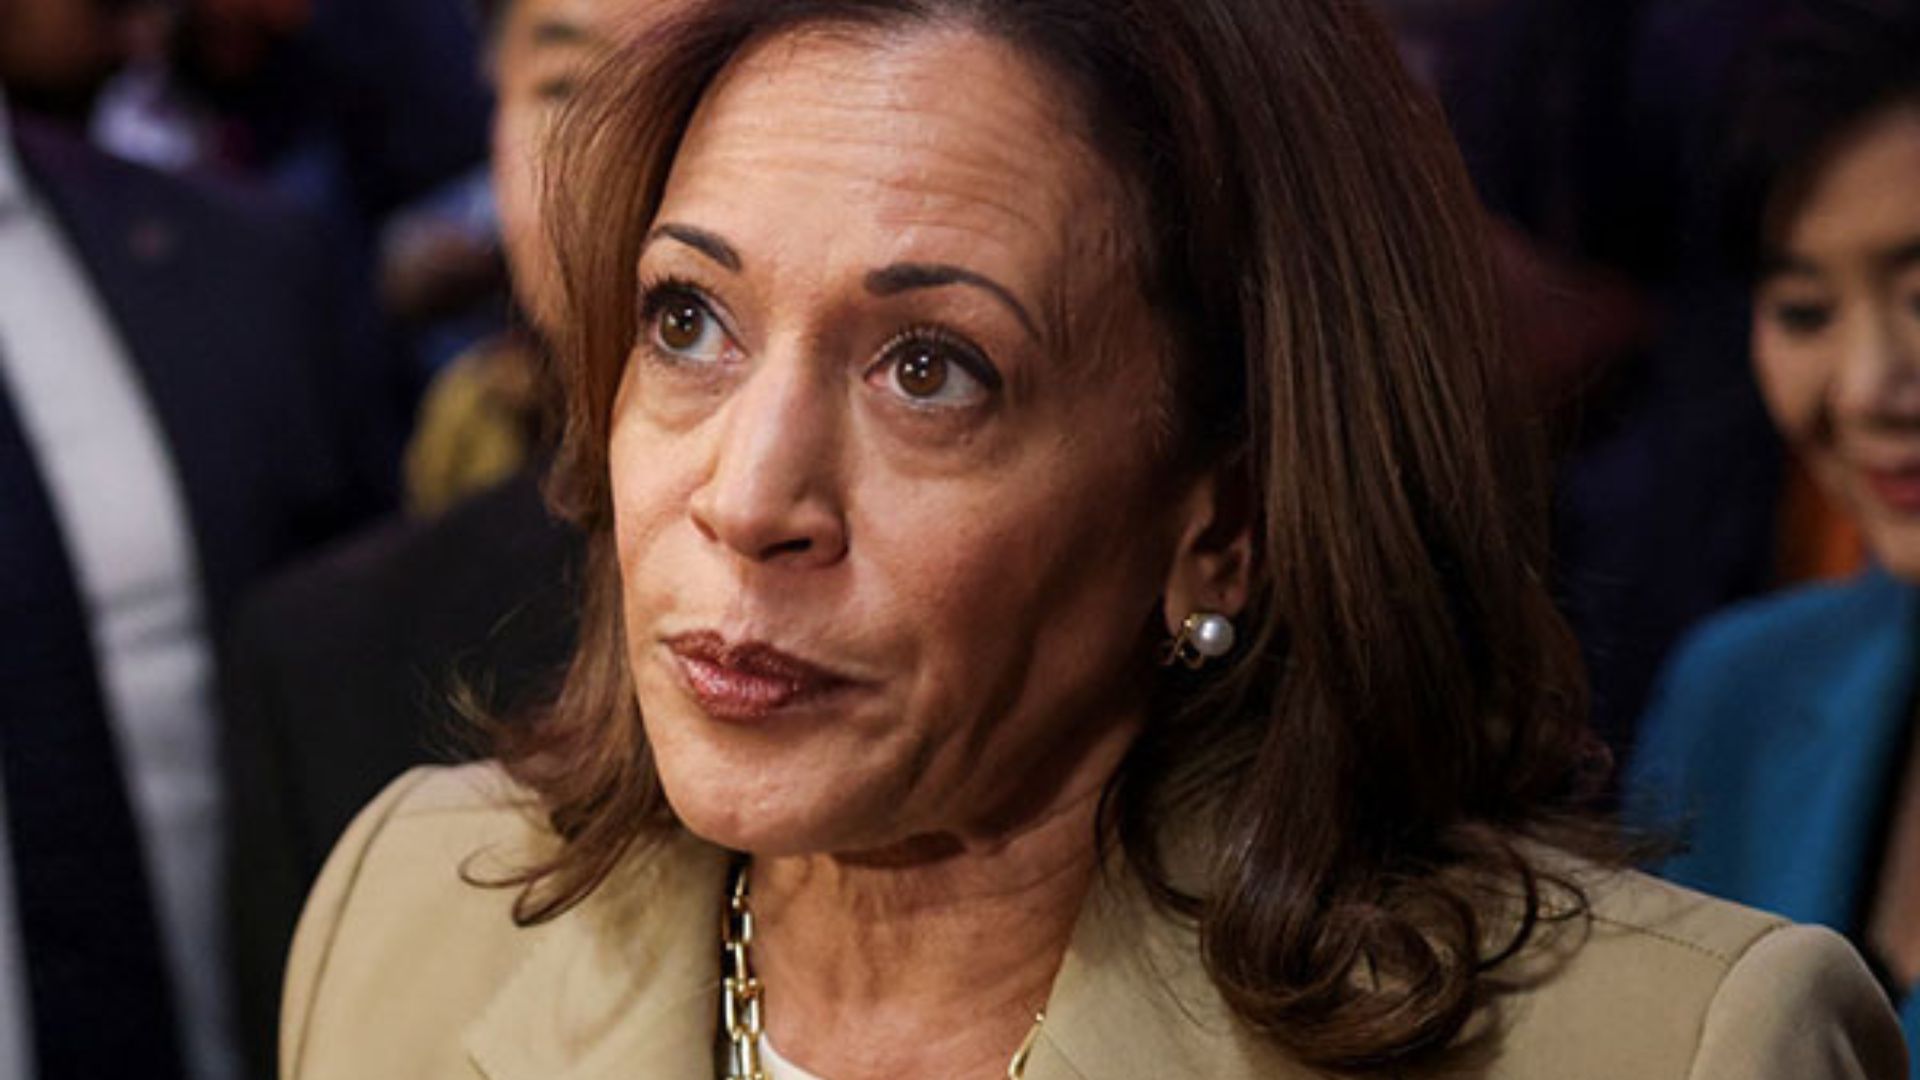 Trump Wants To Take US Back In Time, Kamala Harris, As The Presumptive Democratic Presidential Nominee